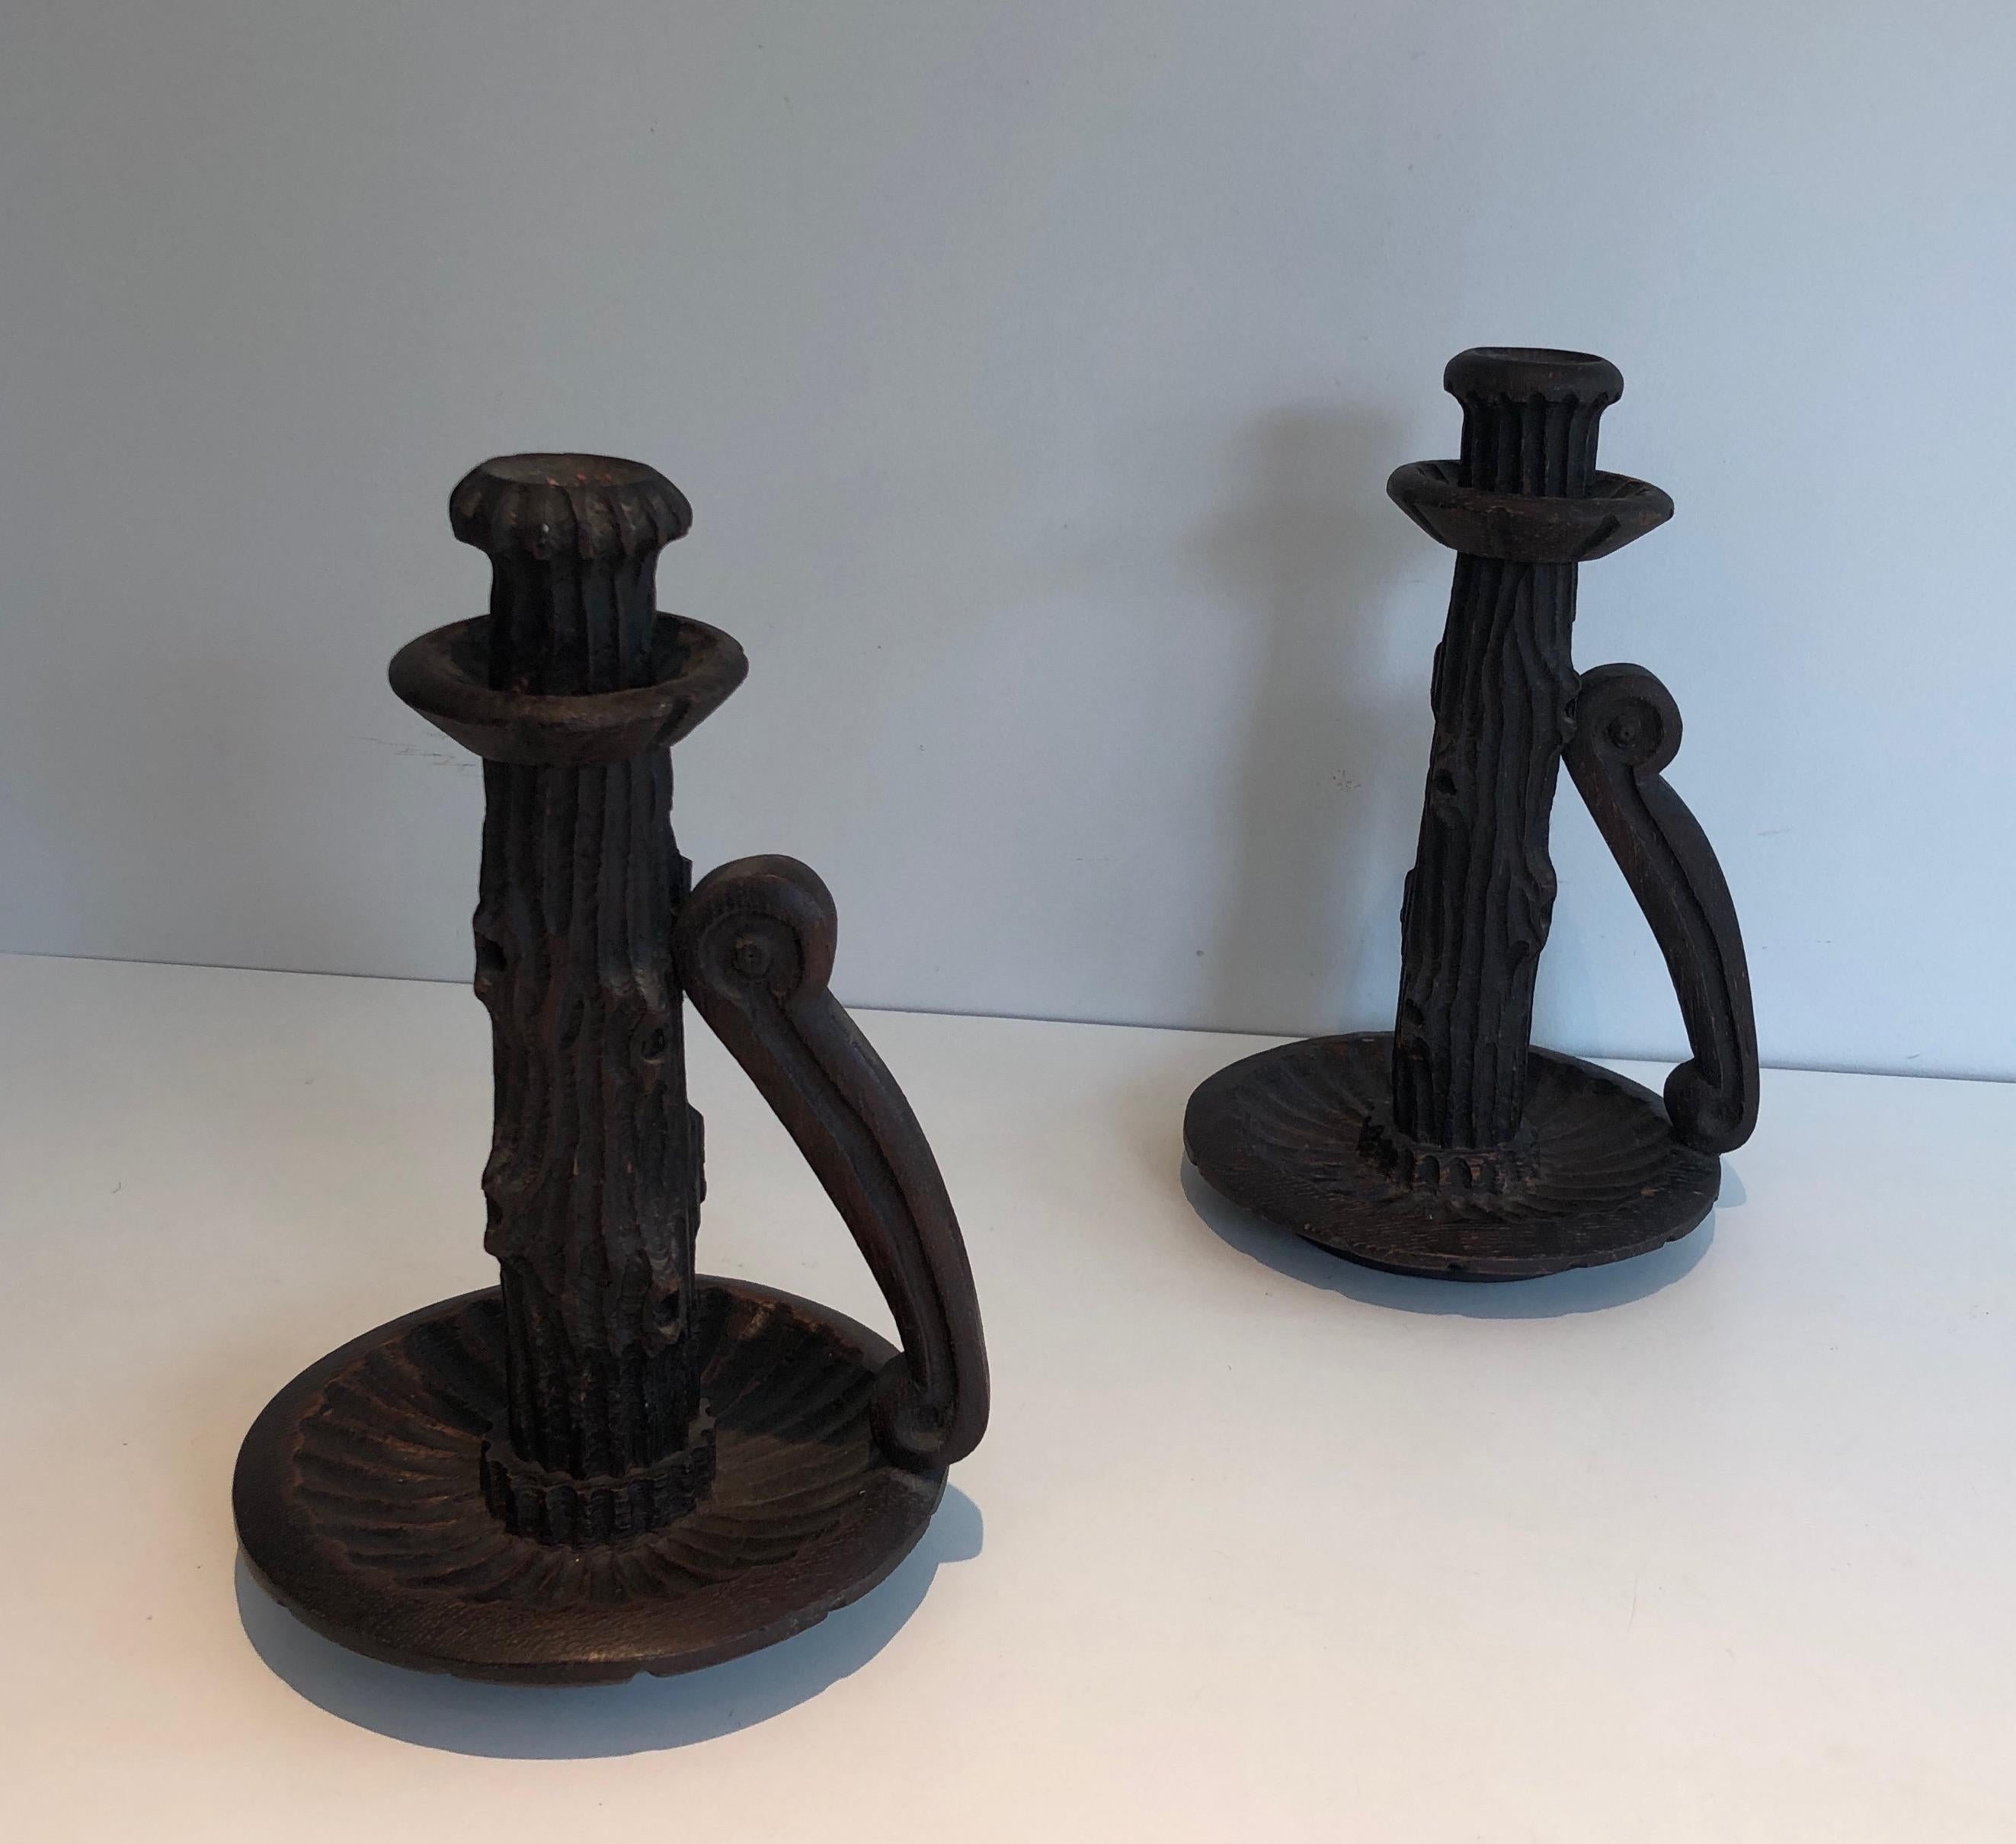 Pair of Tall Brutalist Candle Holders Made of Carved Wood, French, circa 1950 For Sale 8